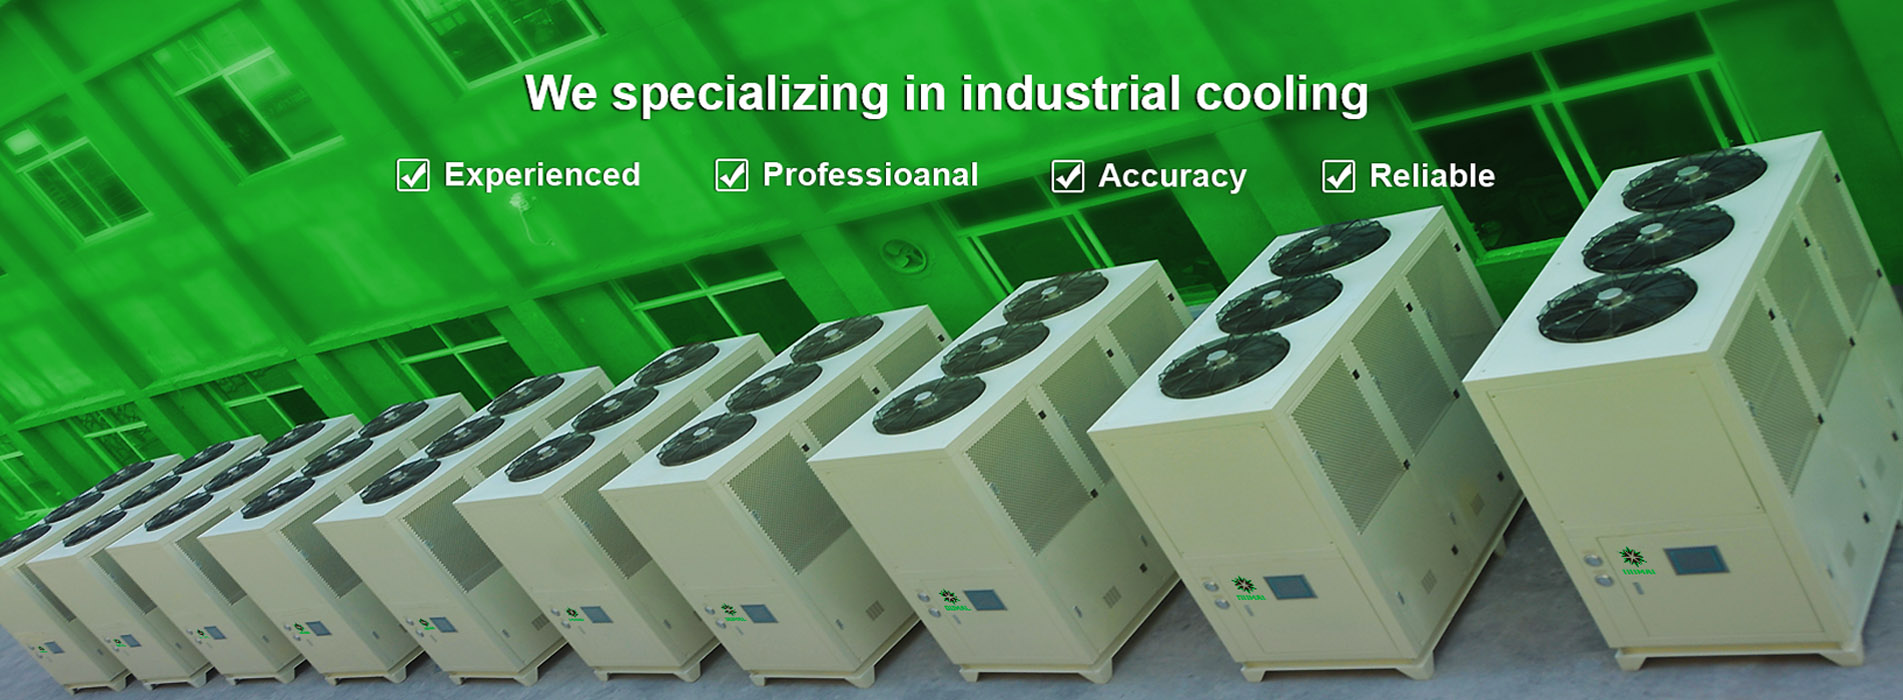 We specializing in industrial cooling!